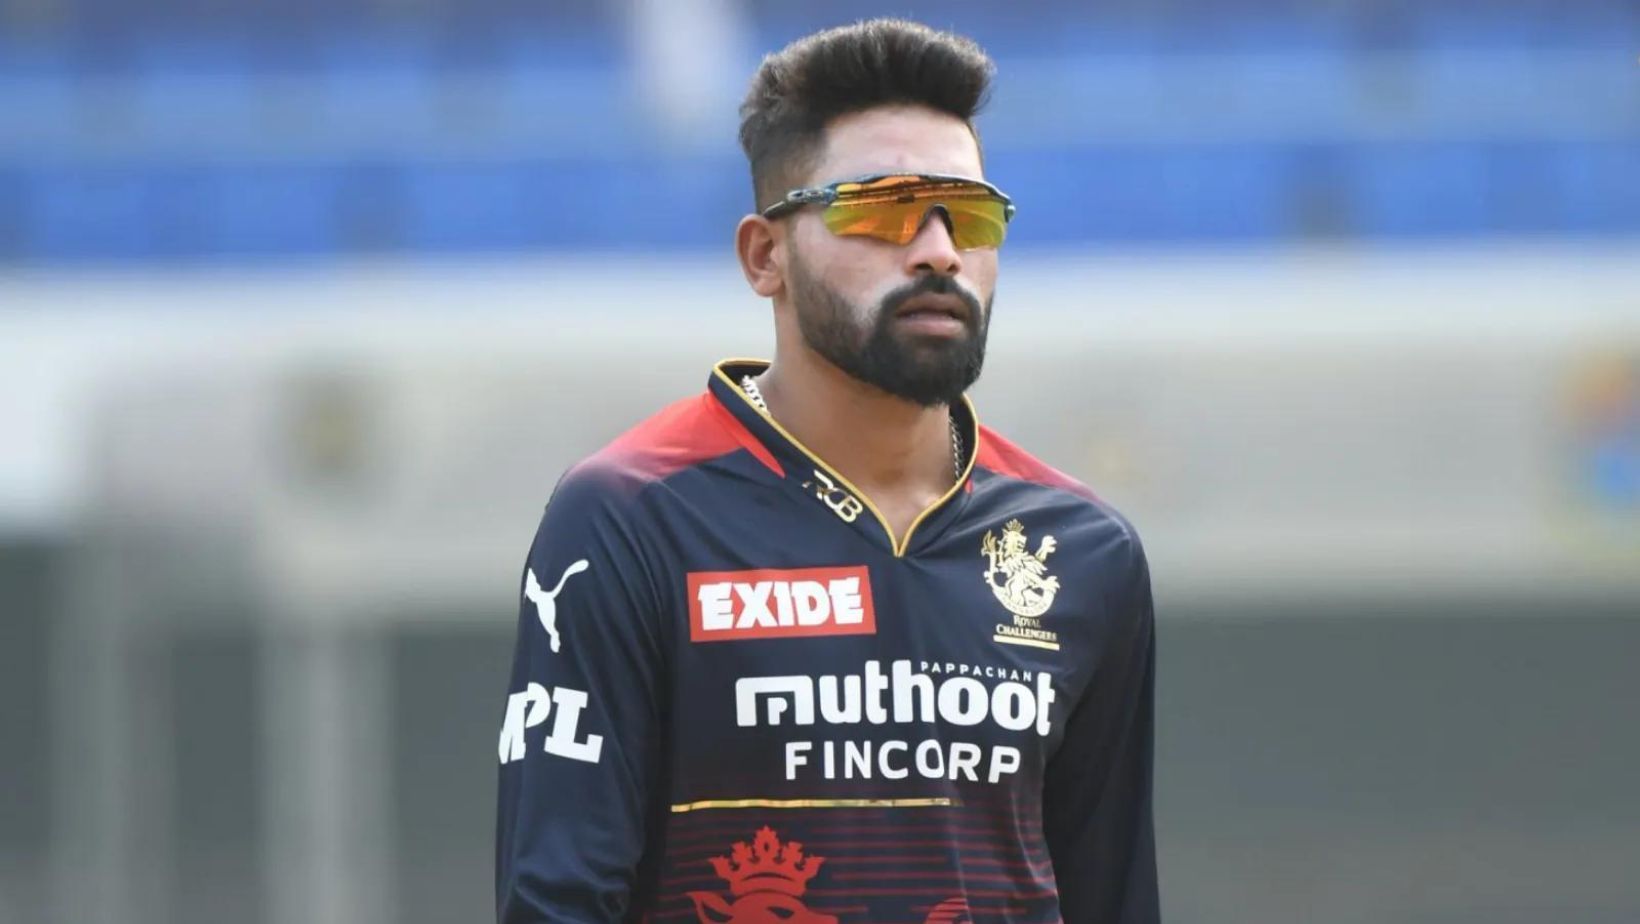 The India international has been dropped from the Royal Challengers Bangalore playing XI.